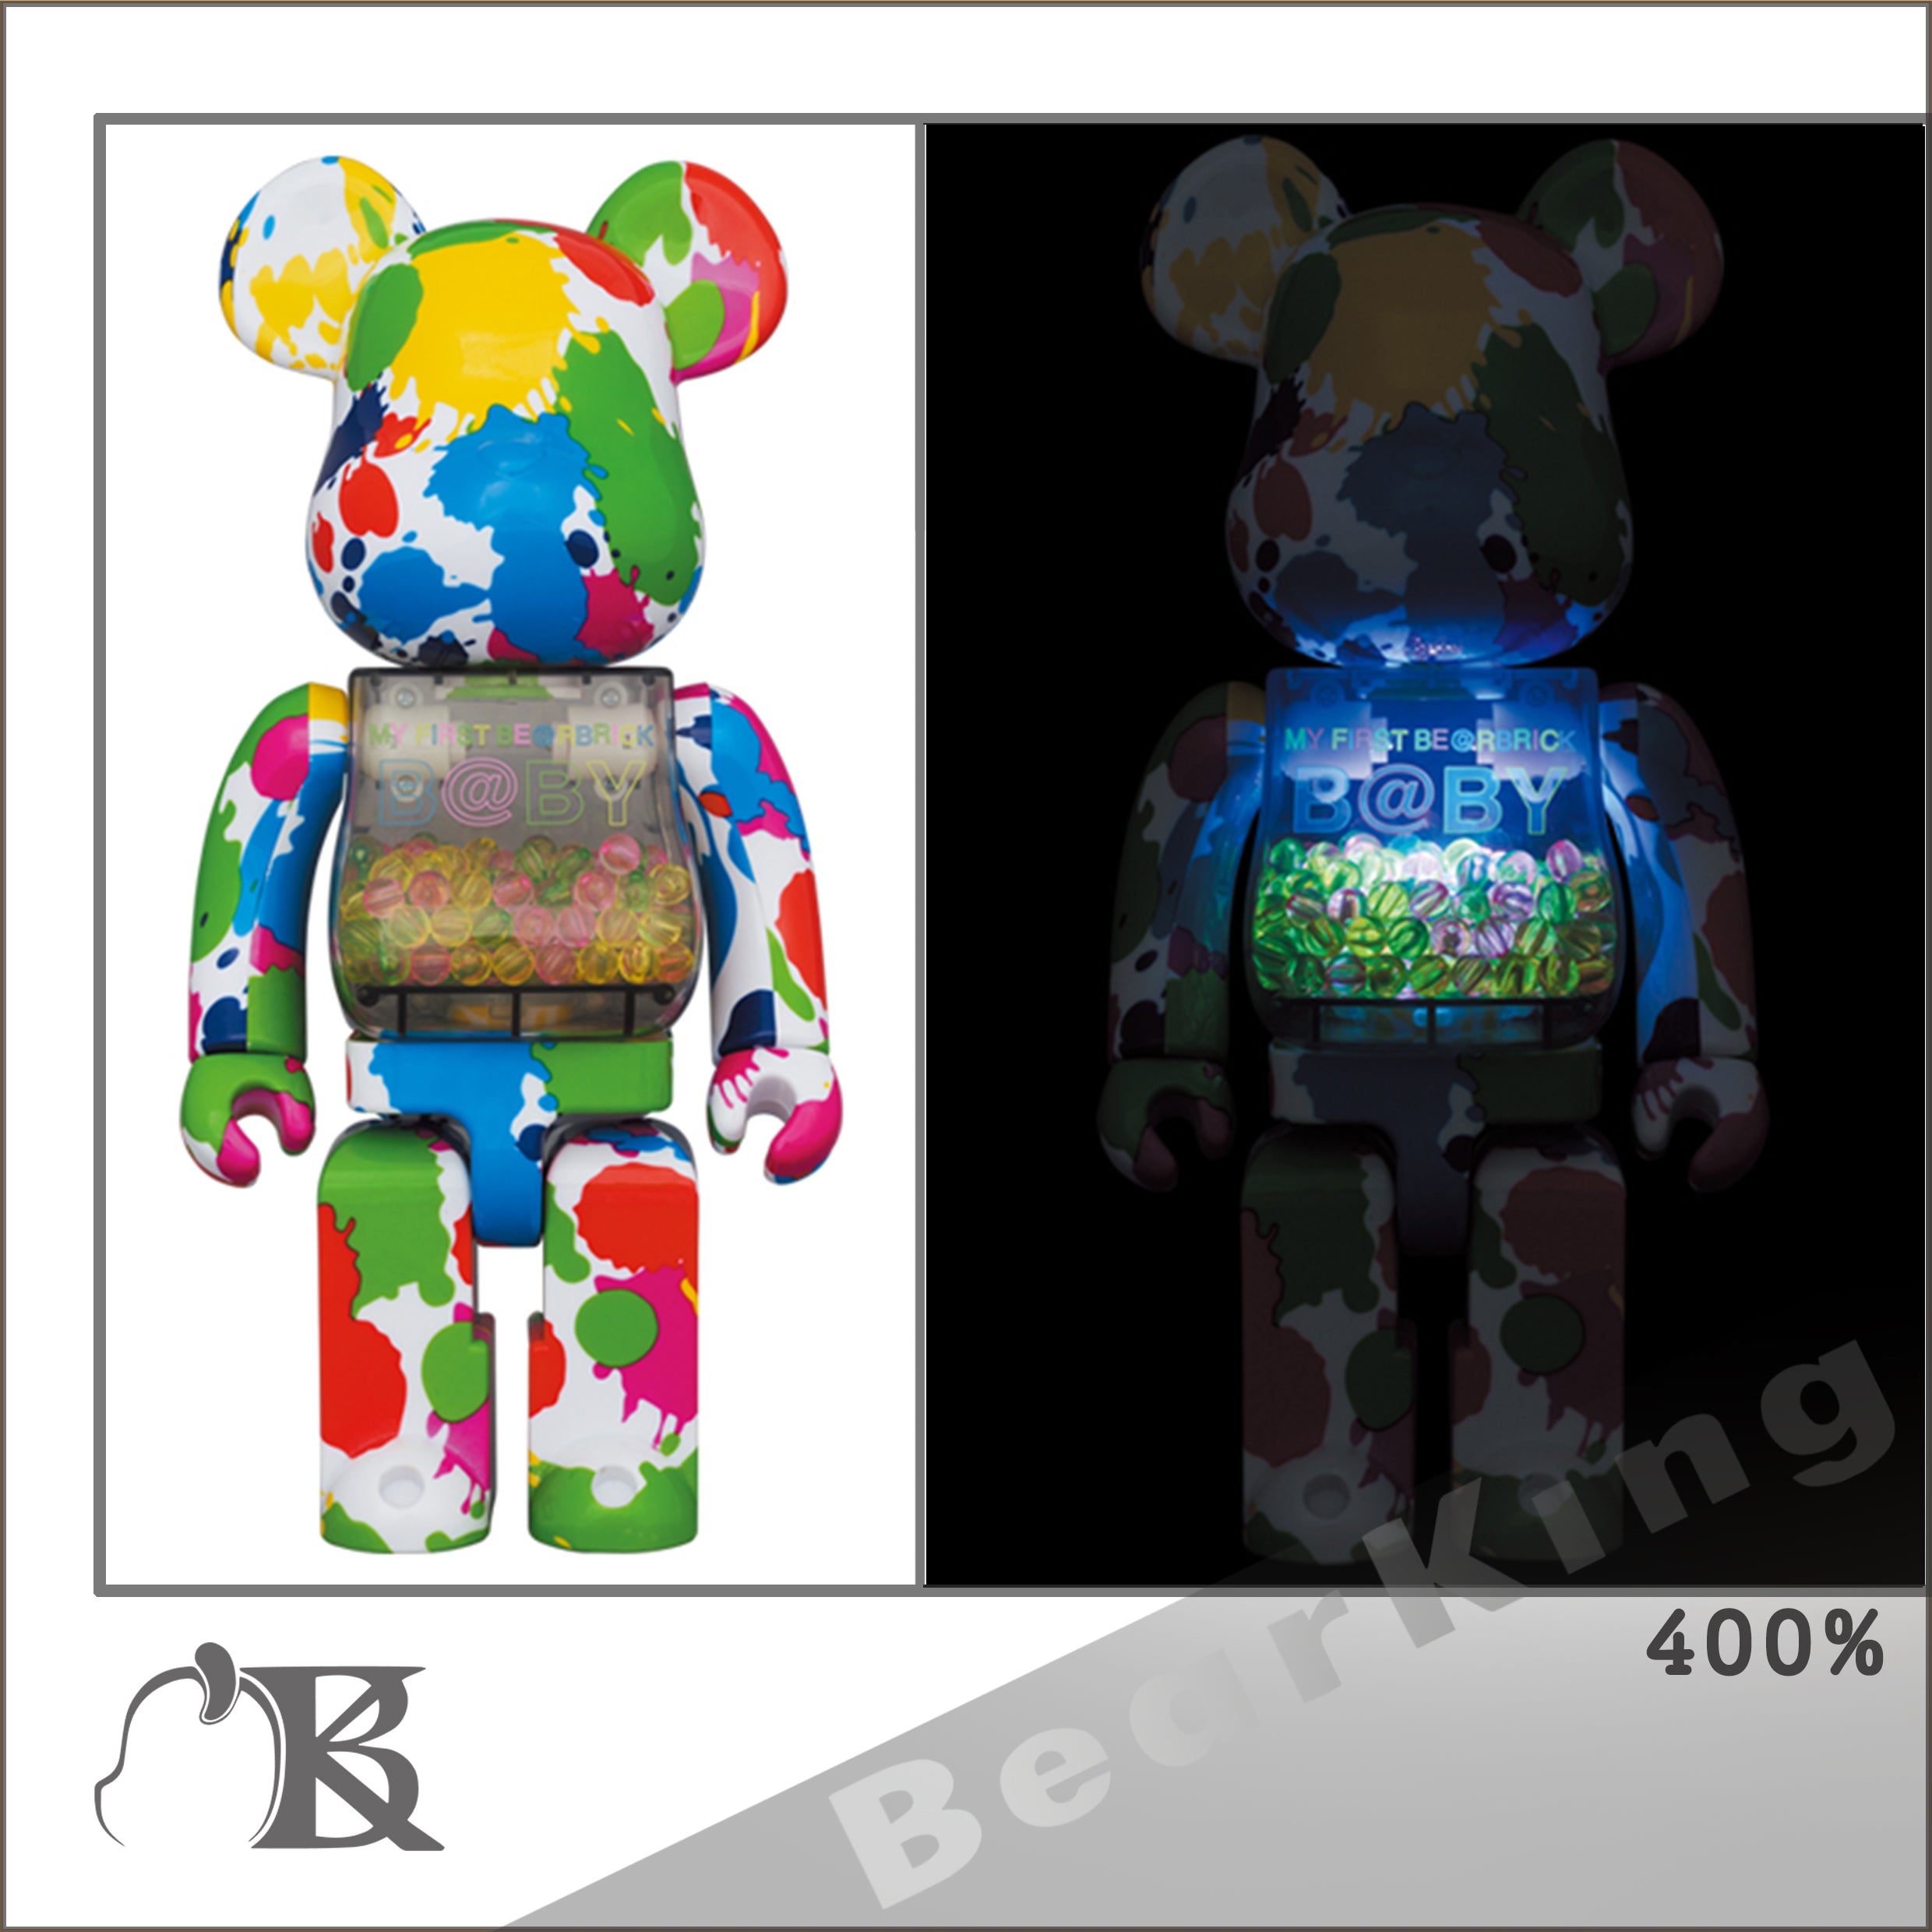 MY FIRST BE@RBRICK B@BY COLOR SPLASH400％